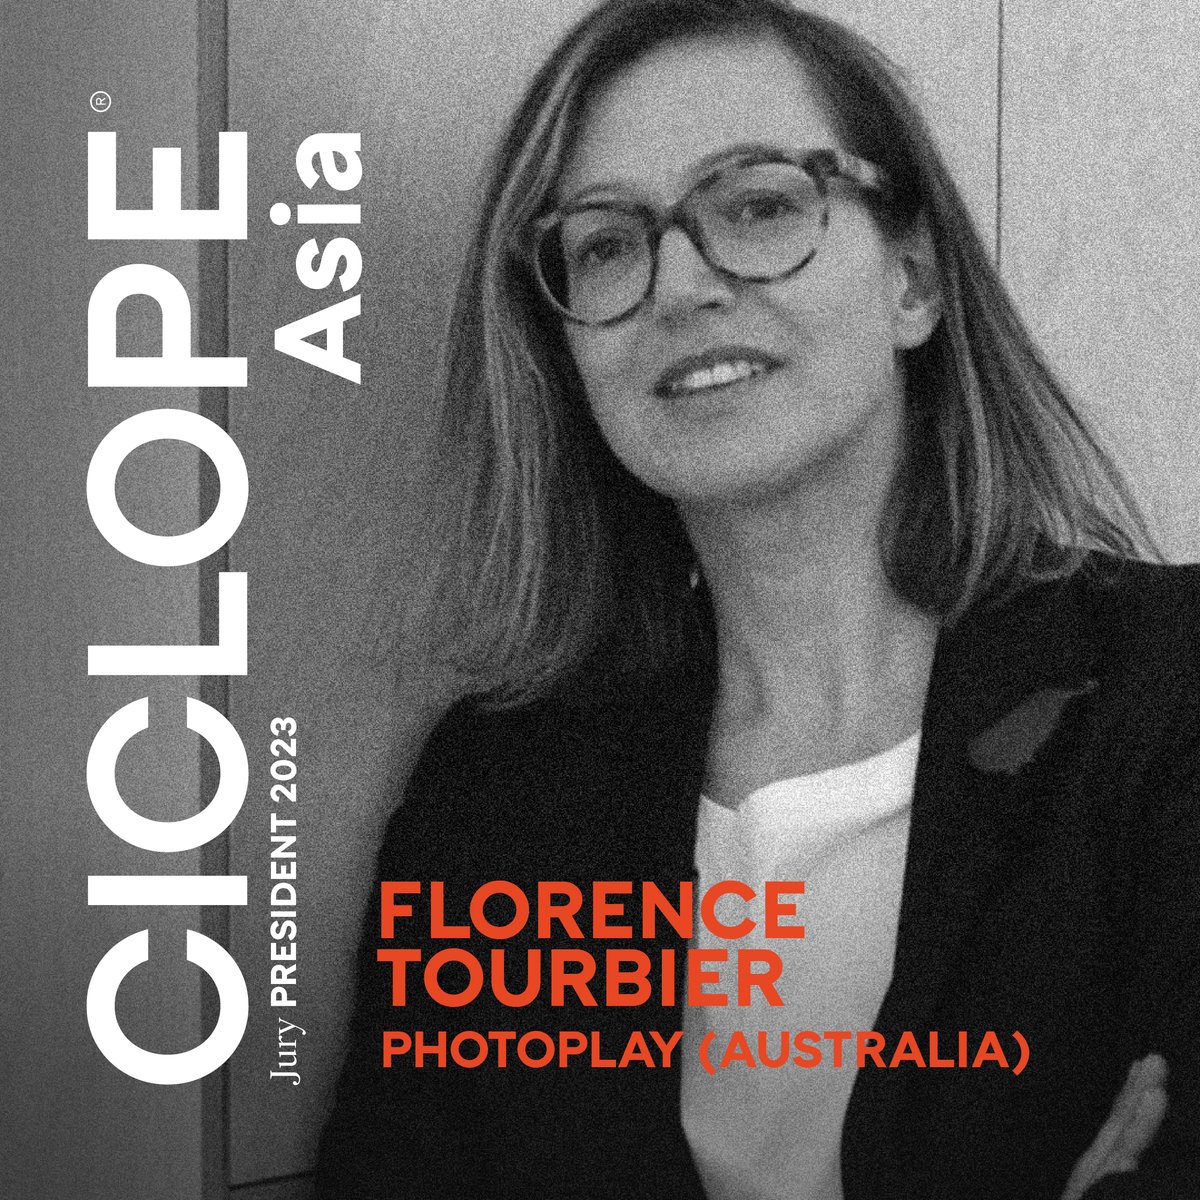 A shout out to Photoplay EP Florence Tourbier who is Jury President for CICLOPE Asia 2023, congrats Flo! 👏